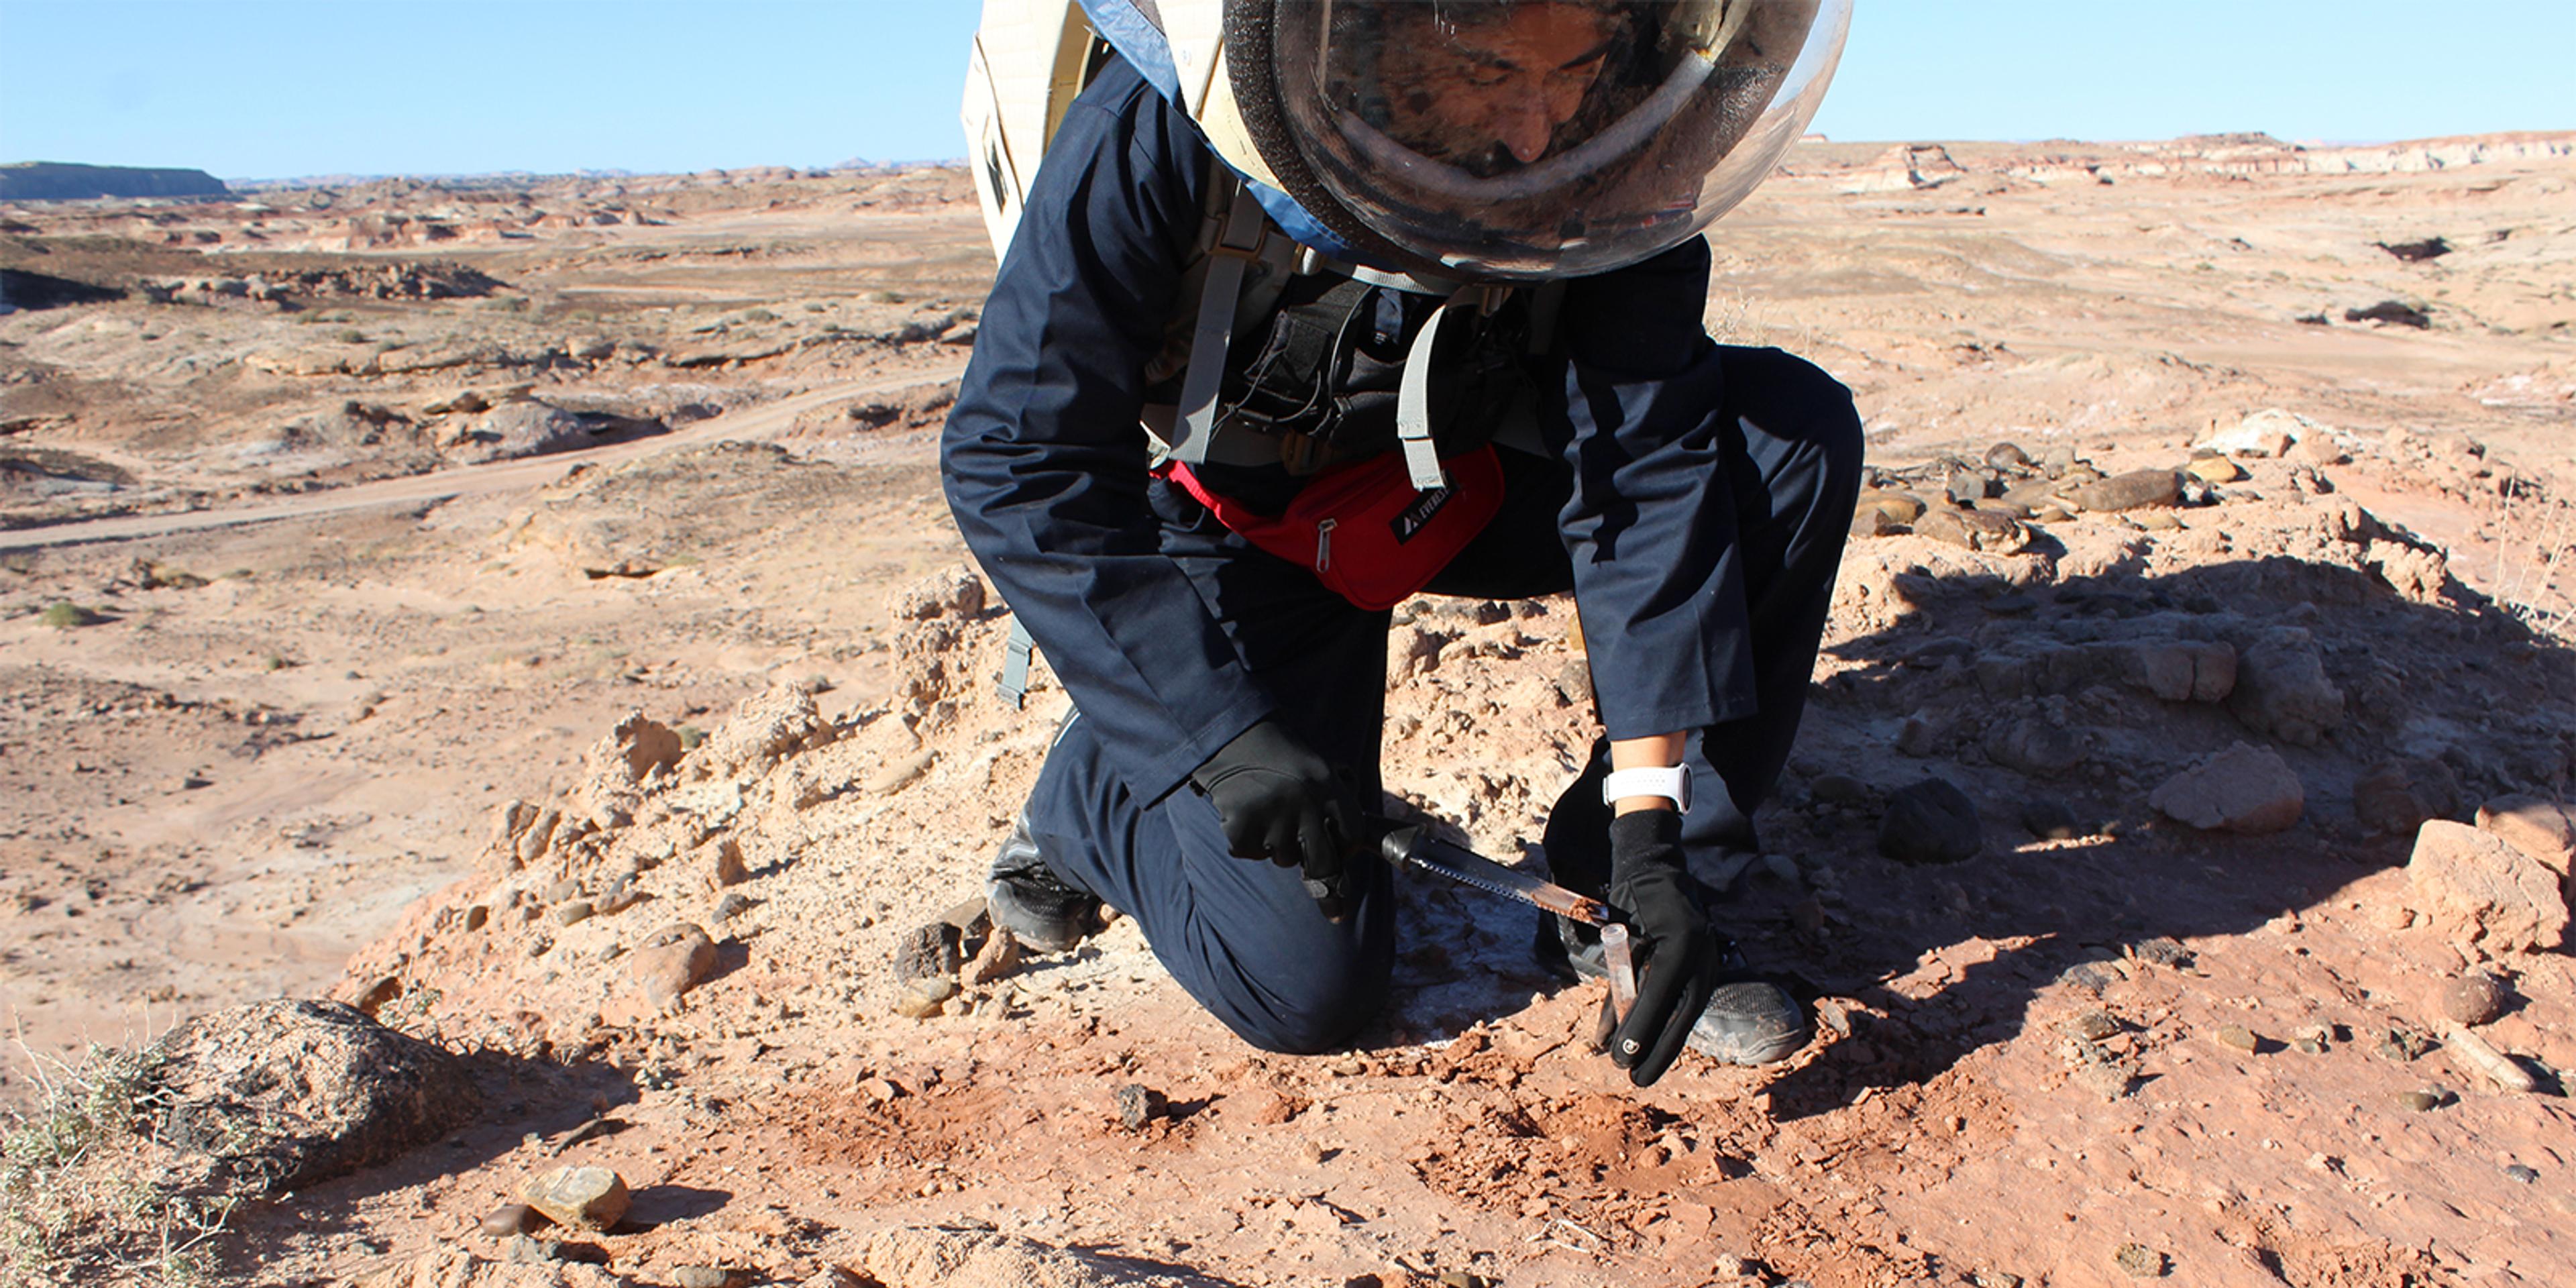 Jas Purewal wearing an EmbracePlus while conducting extravehicular activity in a territory that resembles Mars